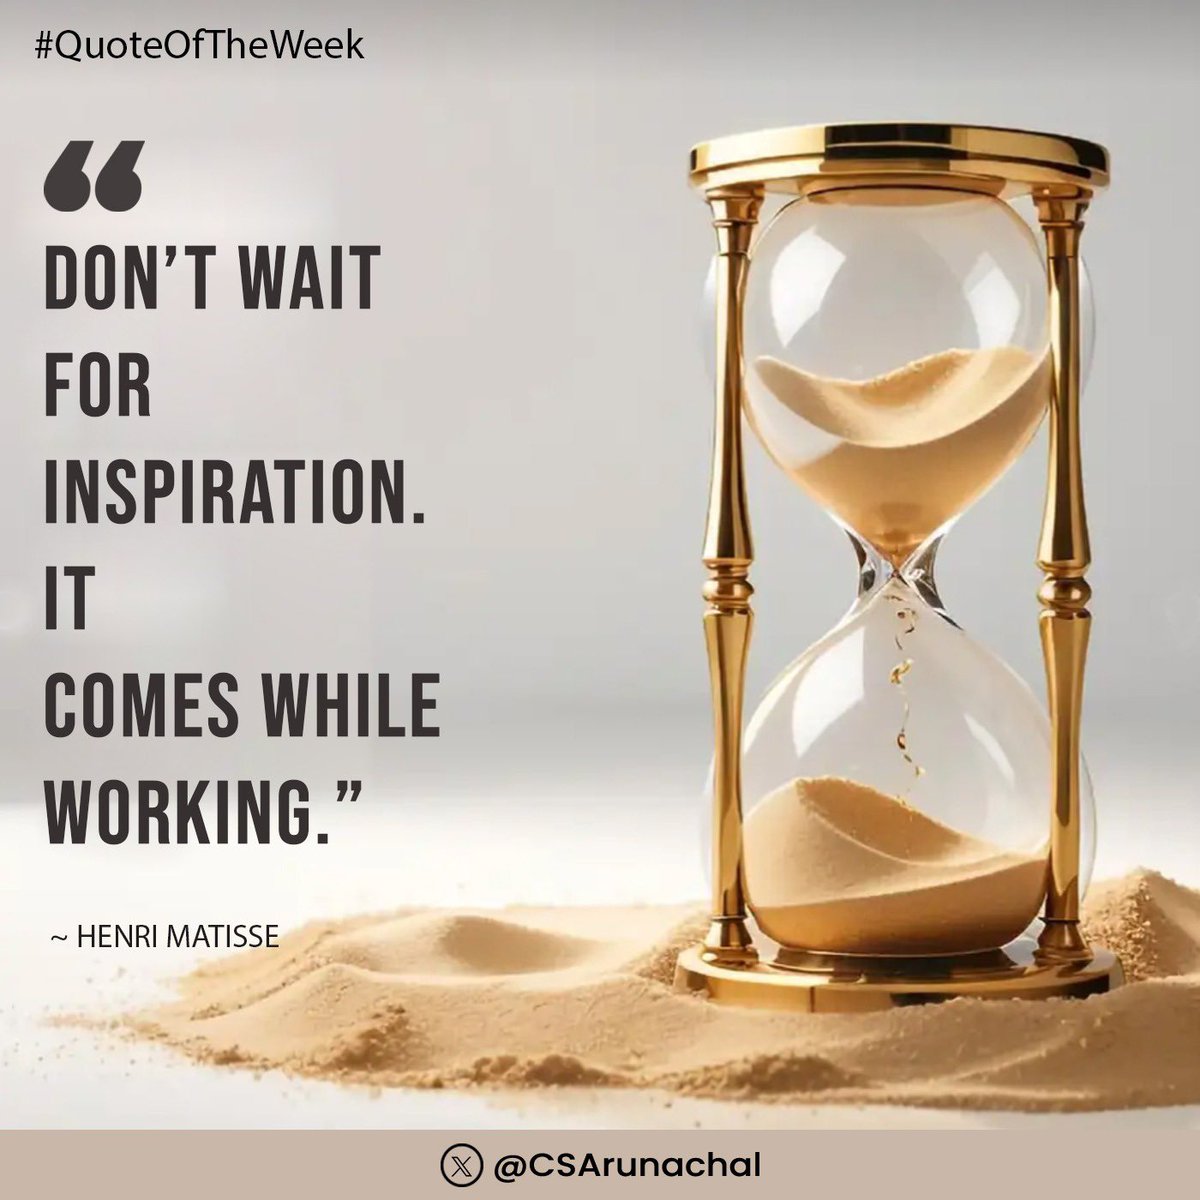 #QuoteOfTheWeek

Don’t wait for inspiration. It comes while working.

~

Henri Matisse